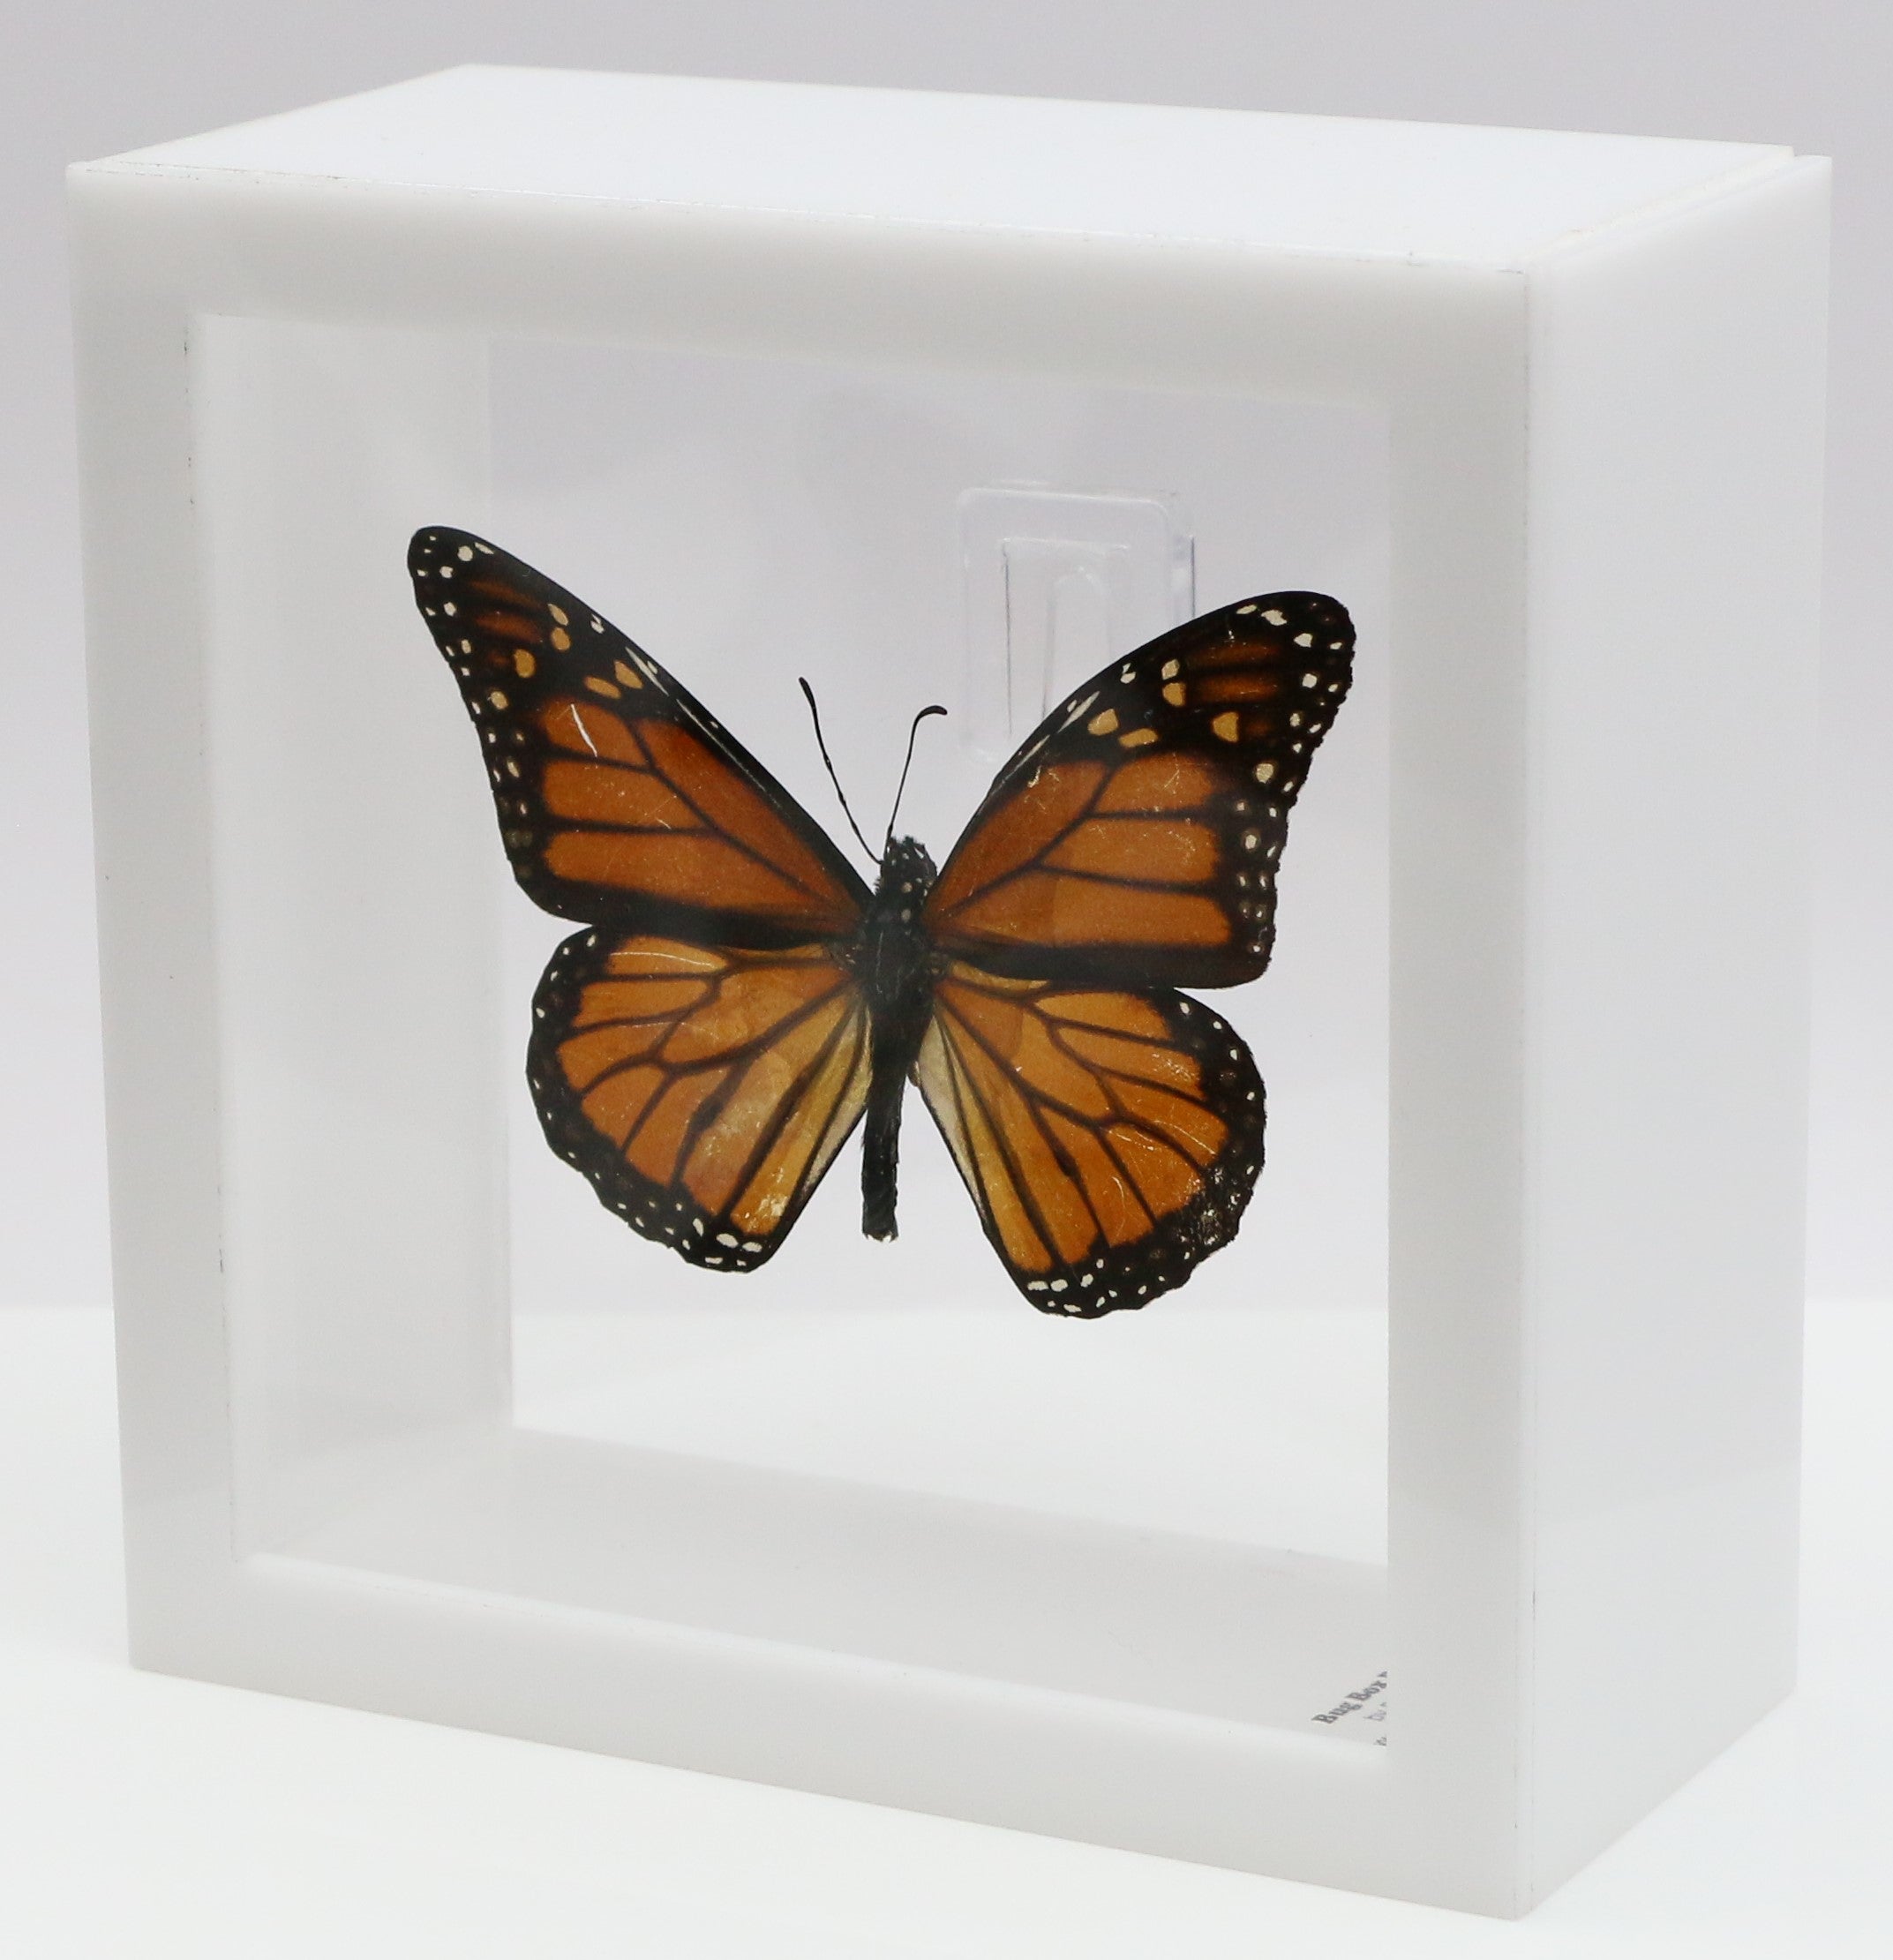 9050502 - Real Butterfly Acrylic Display Box - 5